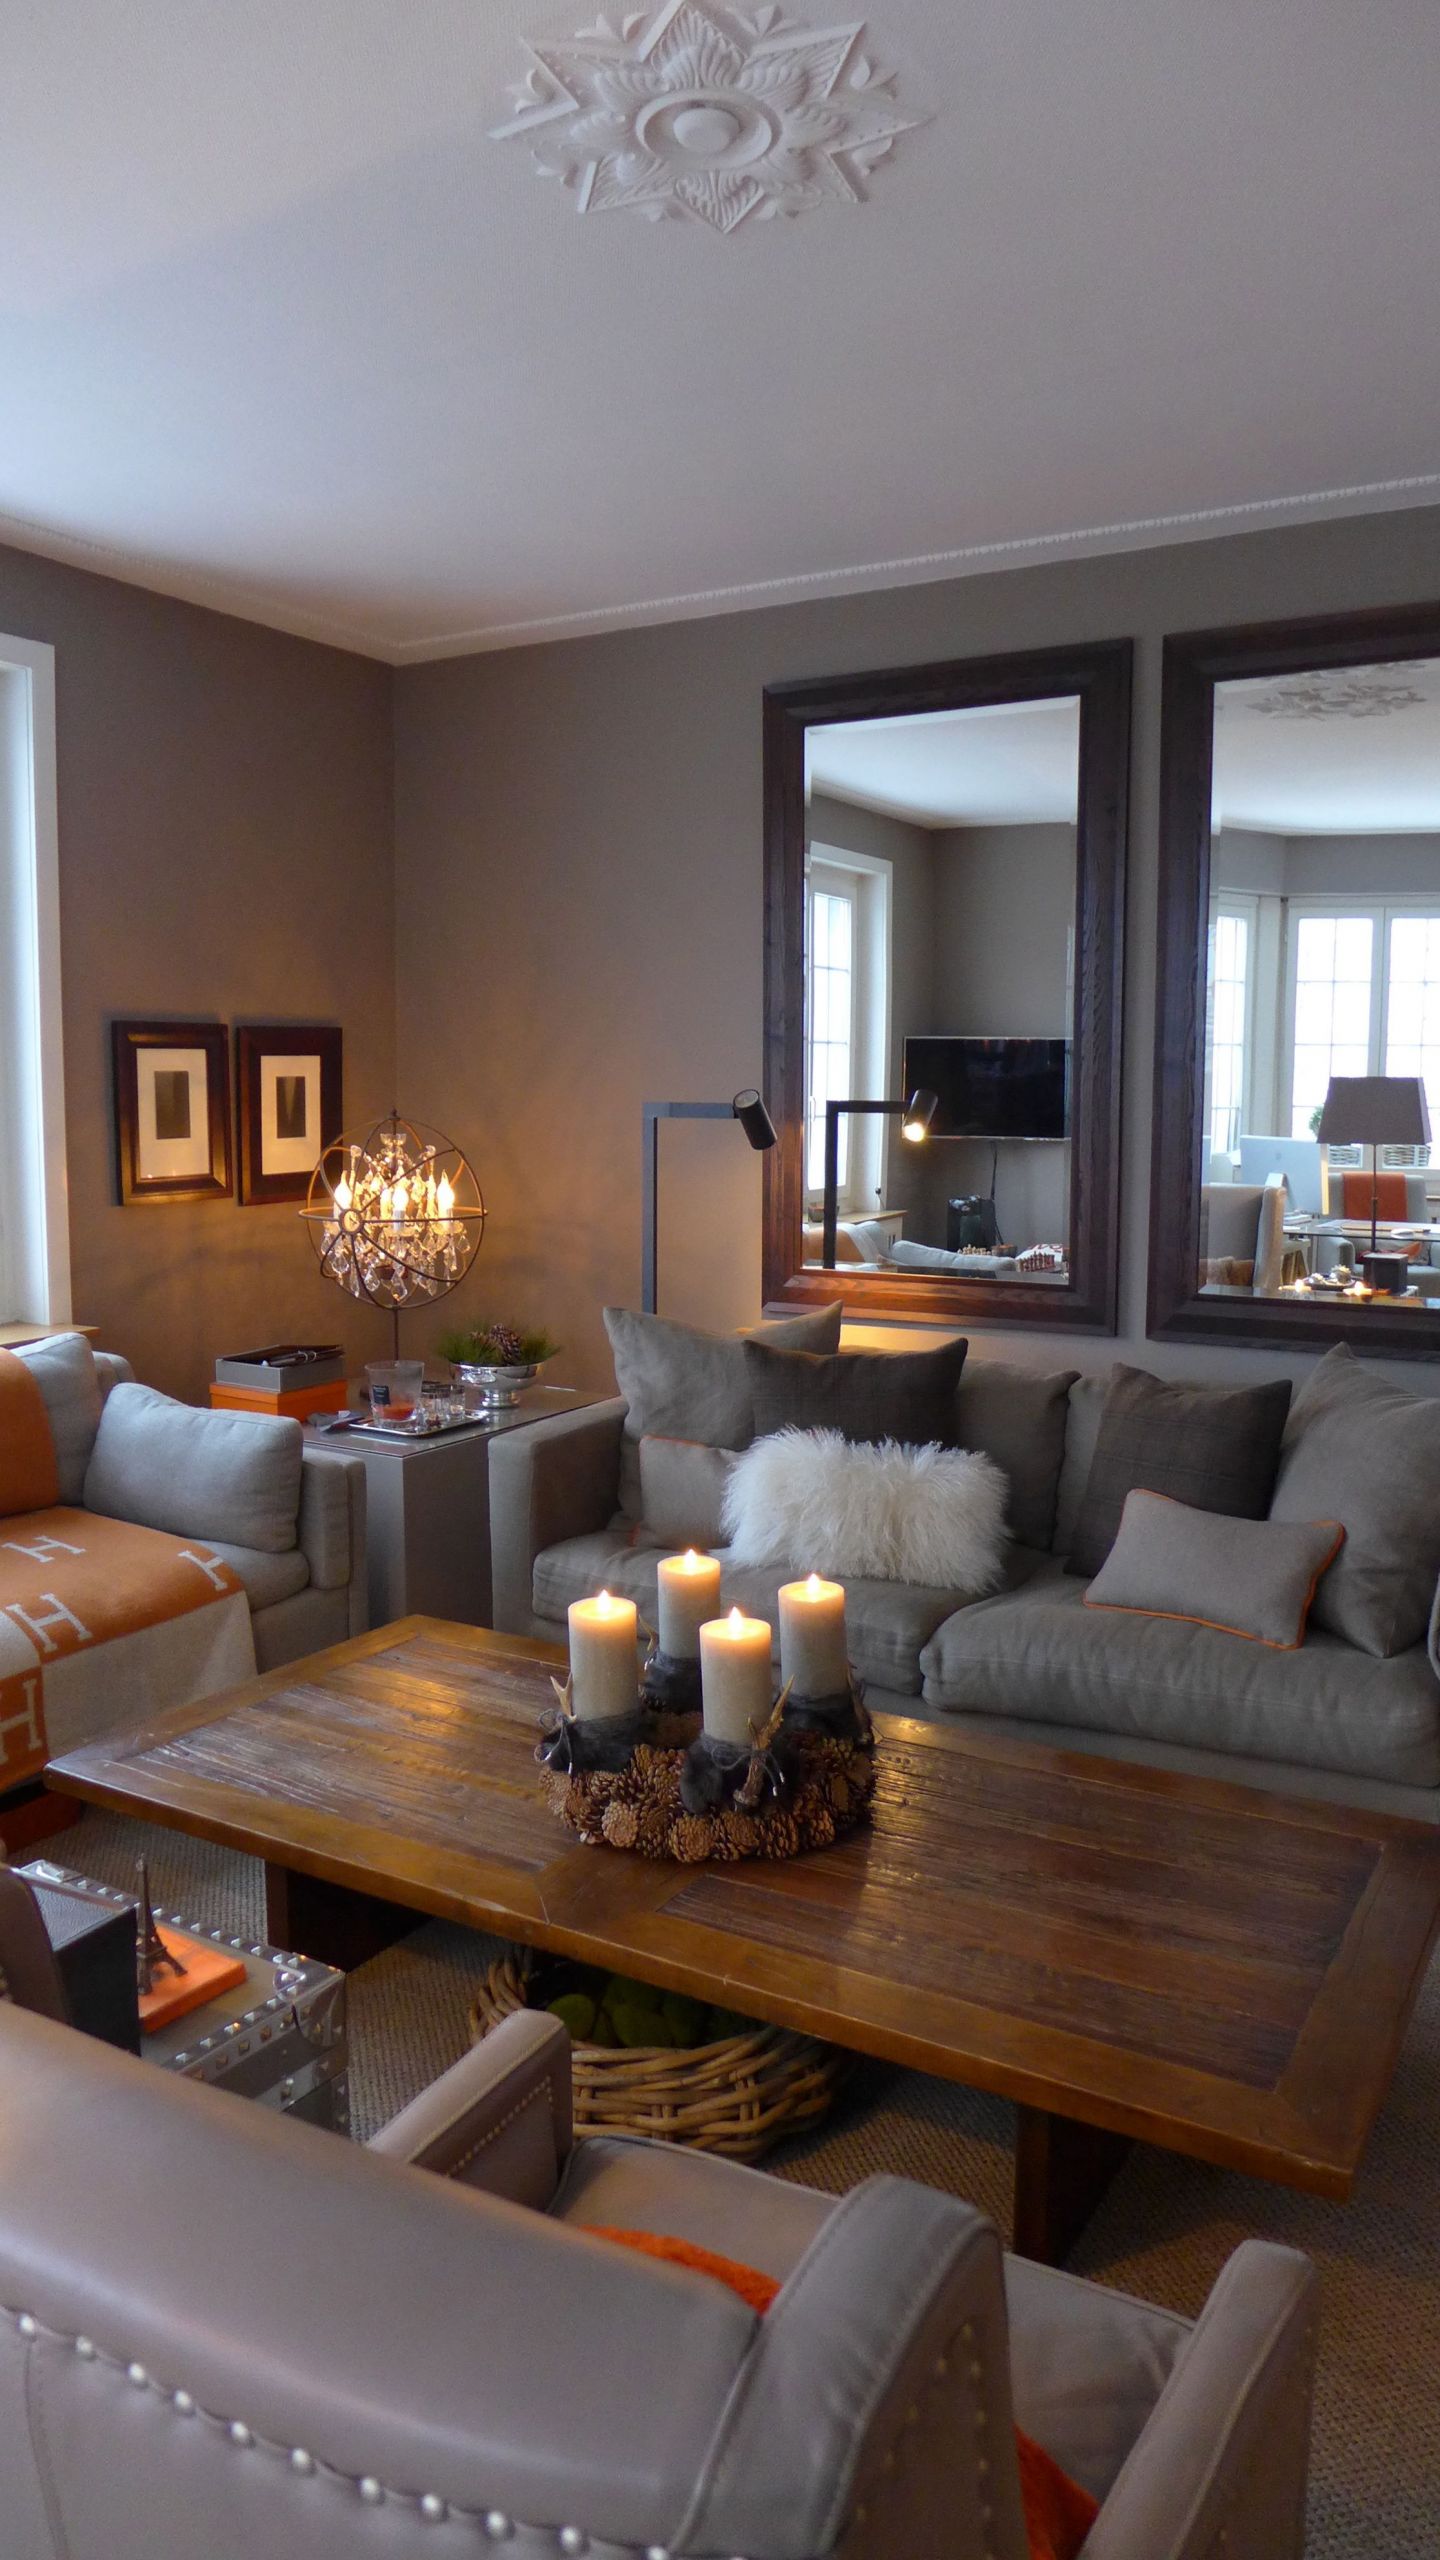 Cozy Living Room Colors
 Warm and cozy living room in taupe with a touch of orange